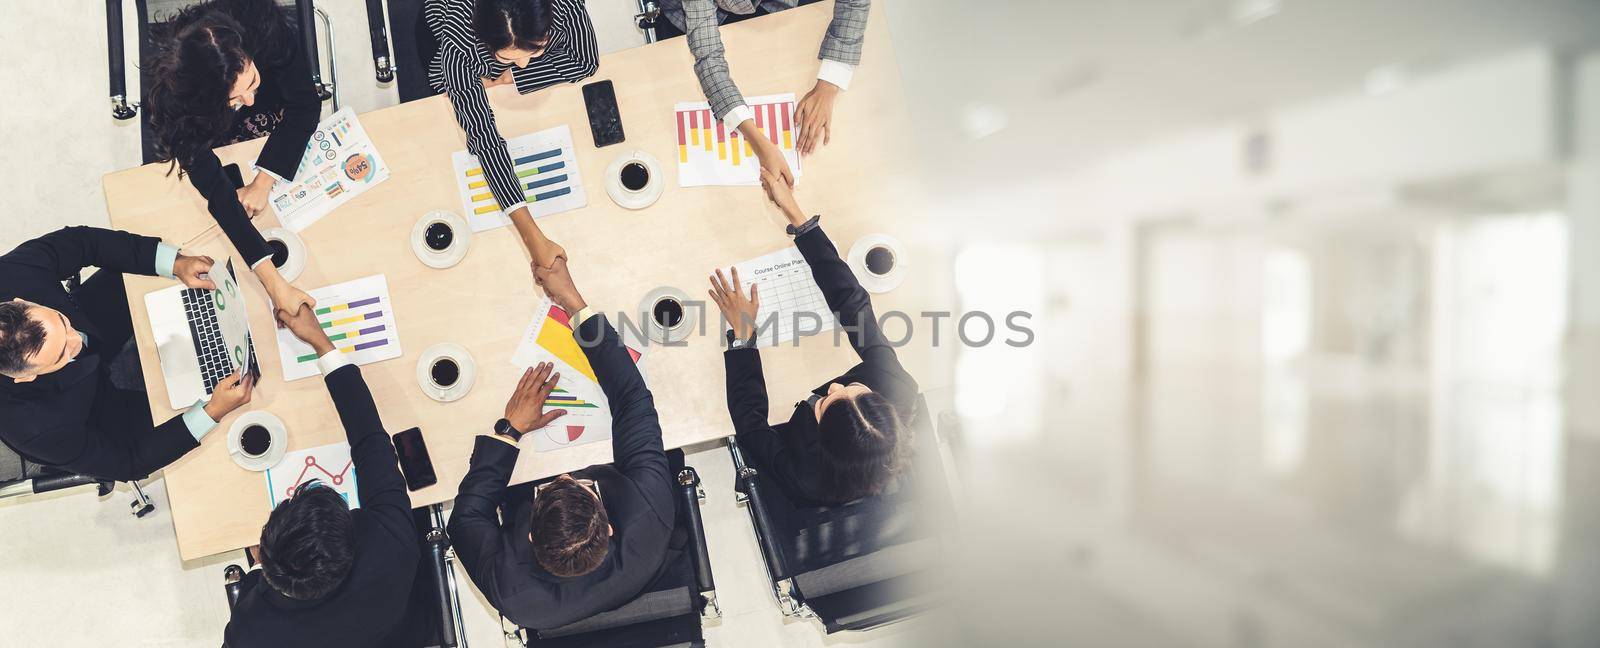 Group business people handshake at meeting table in office together with confident shot from top view . Young businessman and businesswoman workers express agreement of investment deal. broaden view